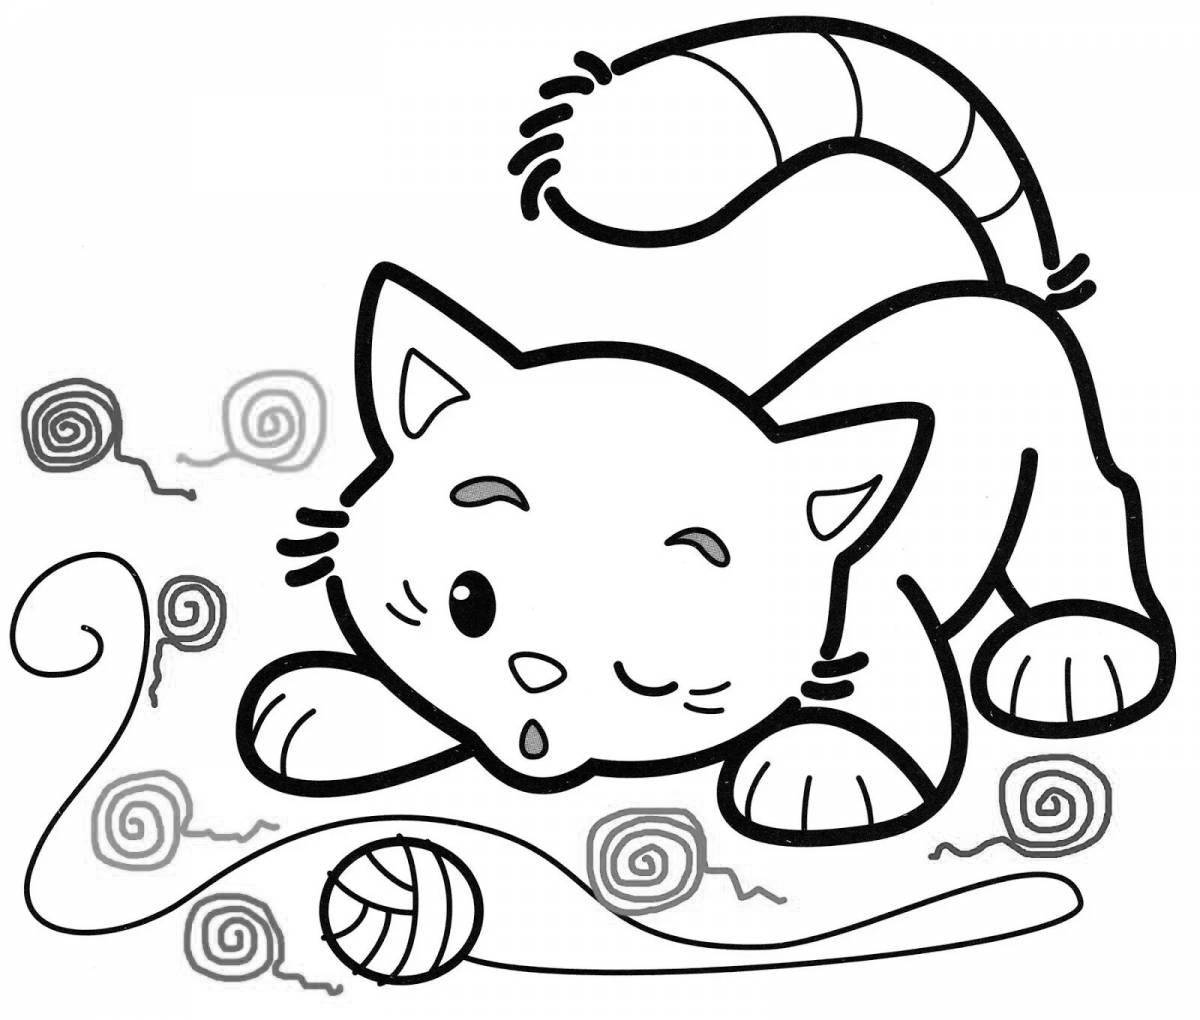 Coloring book playful cat with a ball